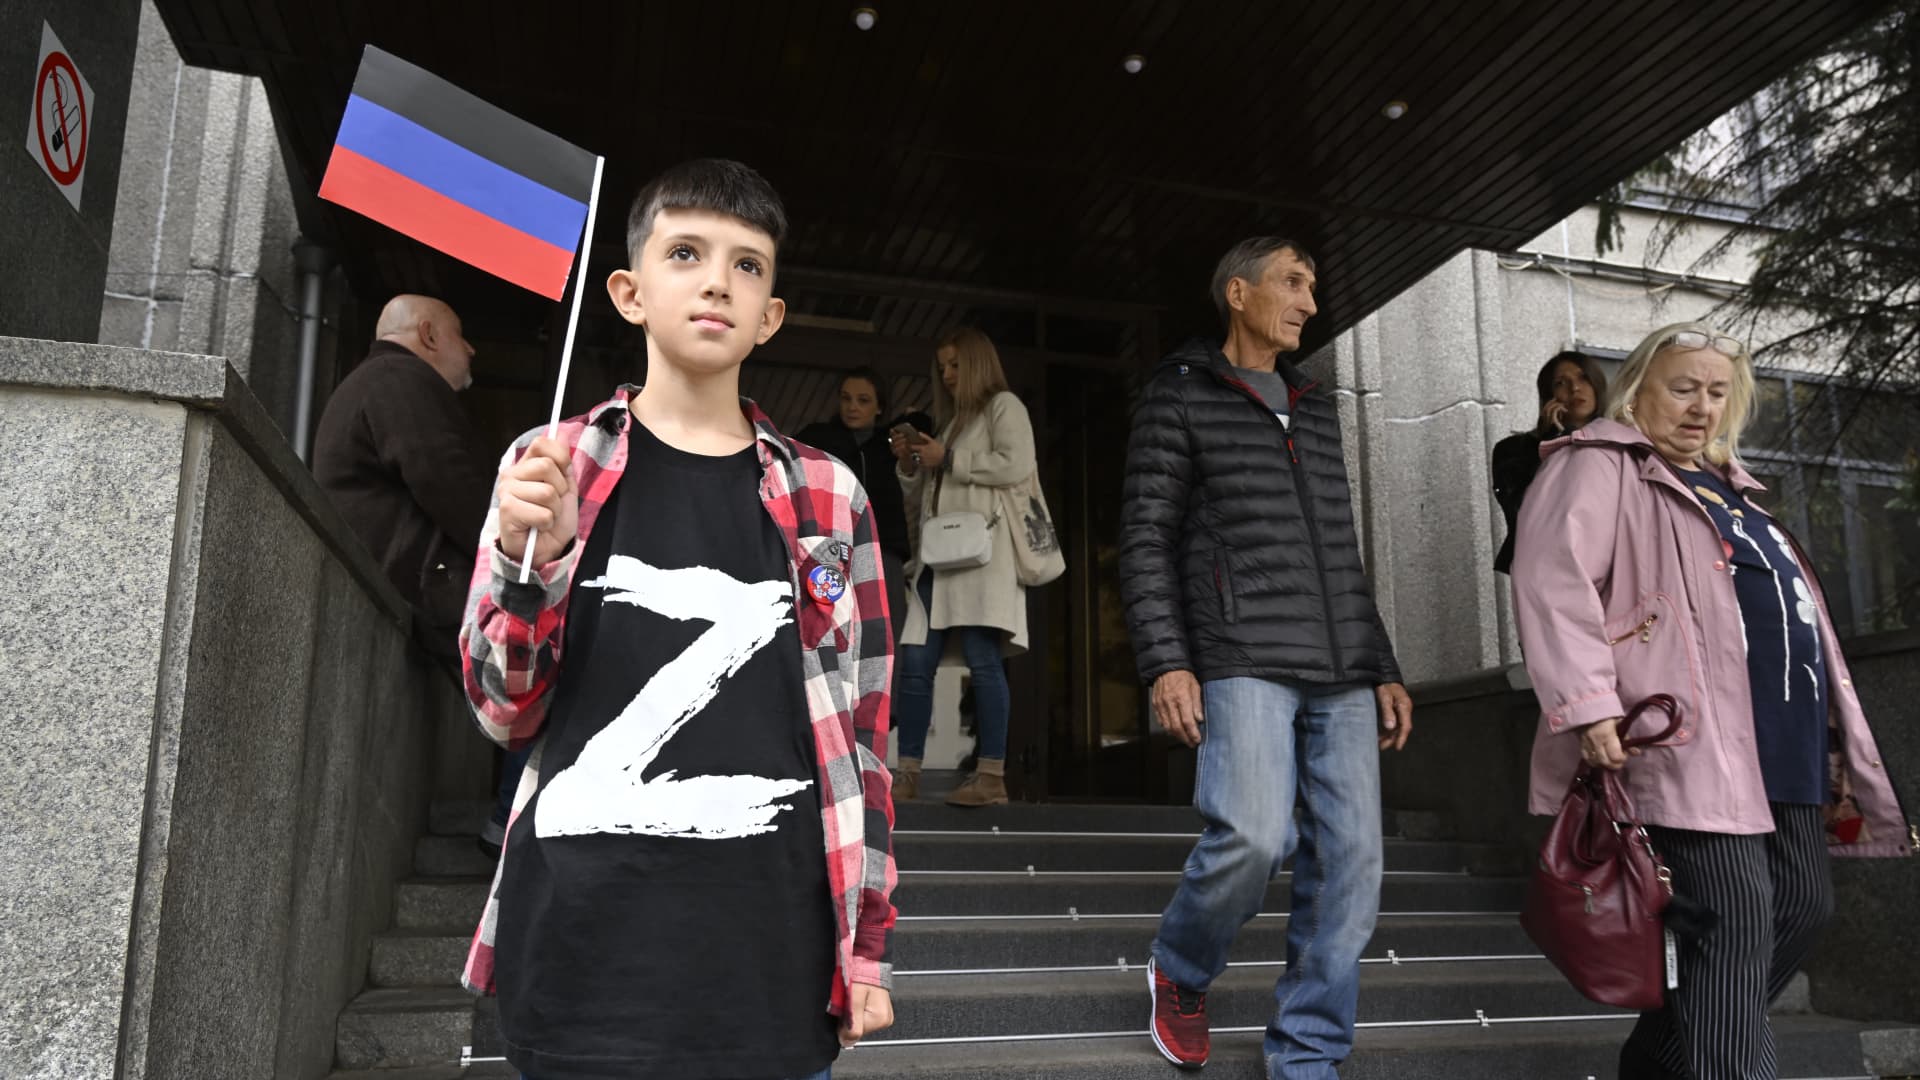 A boy wearing a T-shirt with the letter 'Z', the tactical insignia of Russian troops in Ukraine, and holding a flag of the self-proclaimed Donetsk People's Republic (DNR) - the eastern Ukrainian breakaway region - stands at the entrance to the DNR embassy in Moscow on September 23, 2022, as Moscow-held regions of Ukraine vote in annexation referendums that Kyiv and its allies say are illegal and illegitimate.